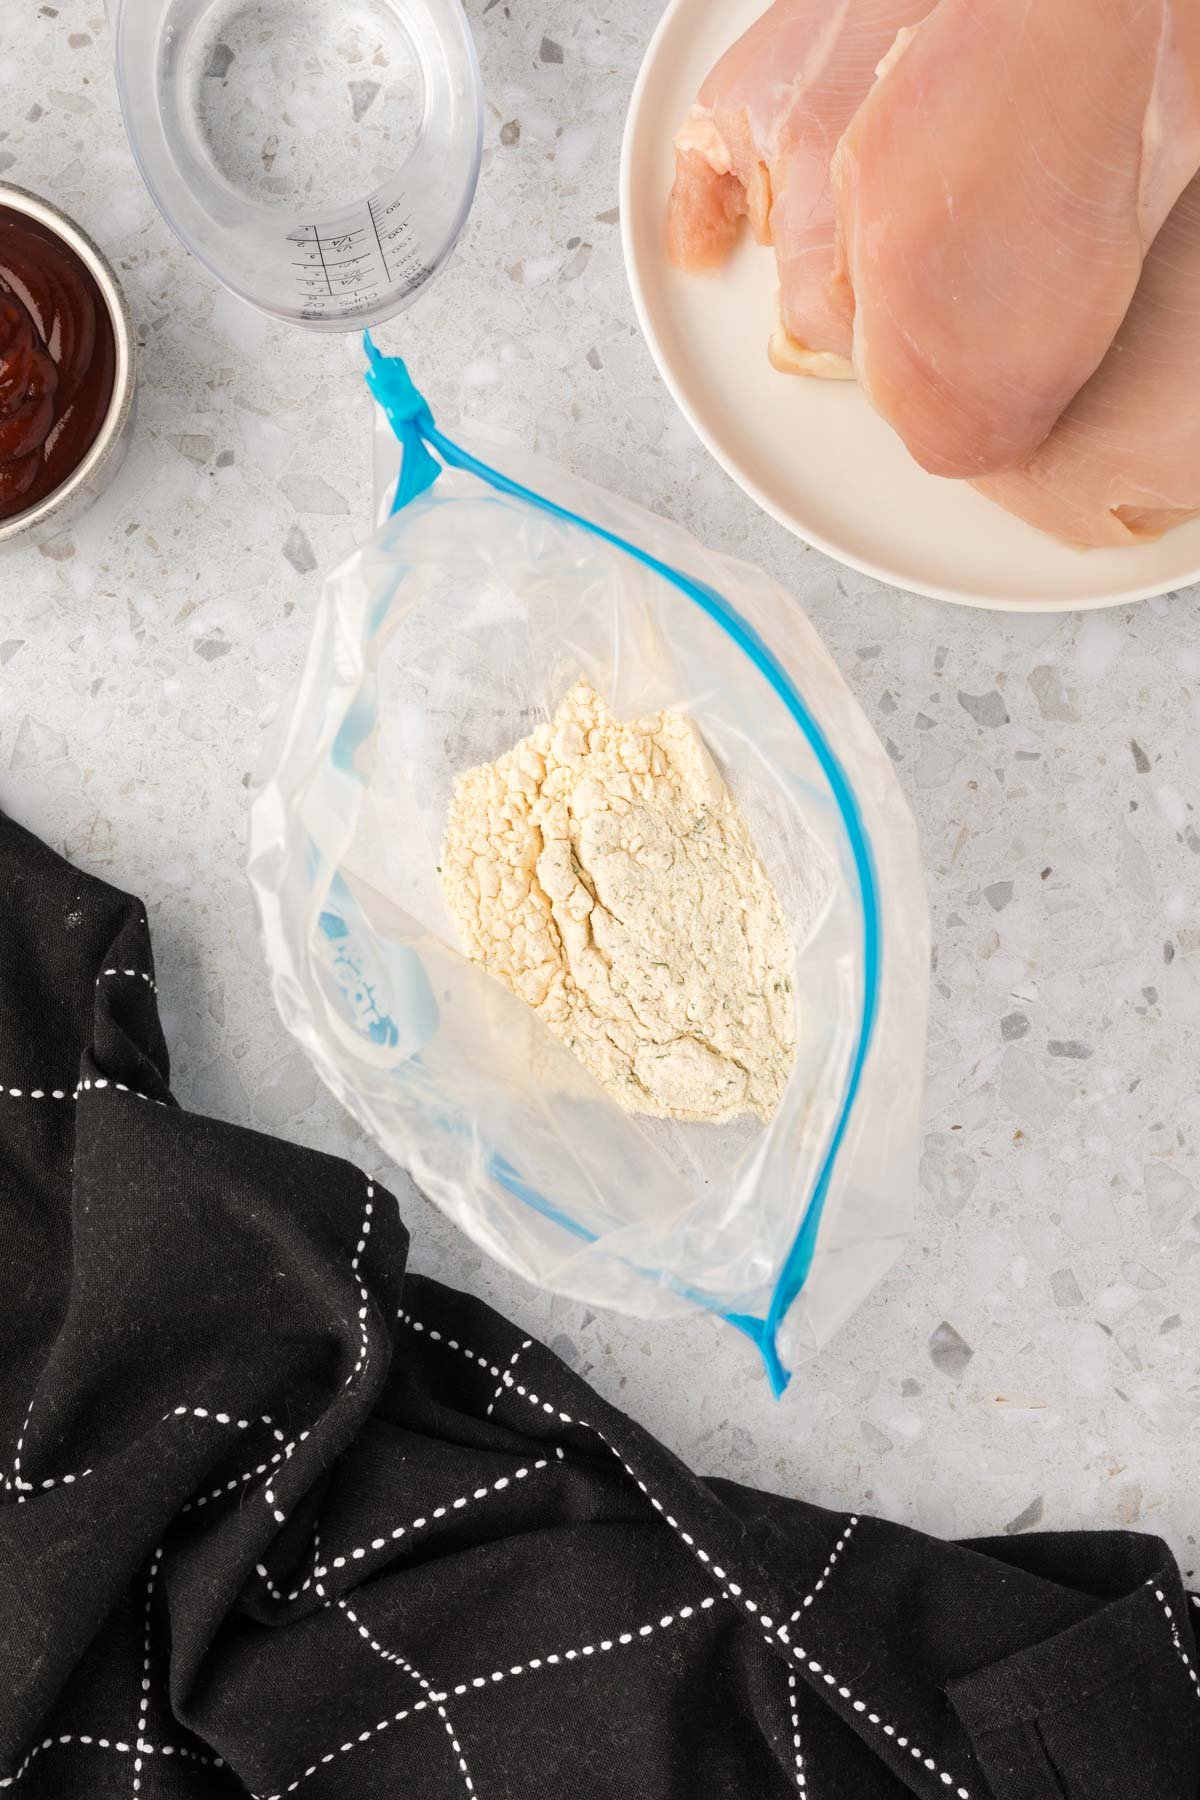 Combining the ranch seasoning mix and flour in a ziploc bag